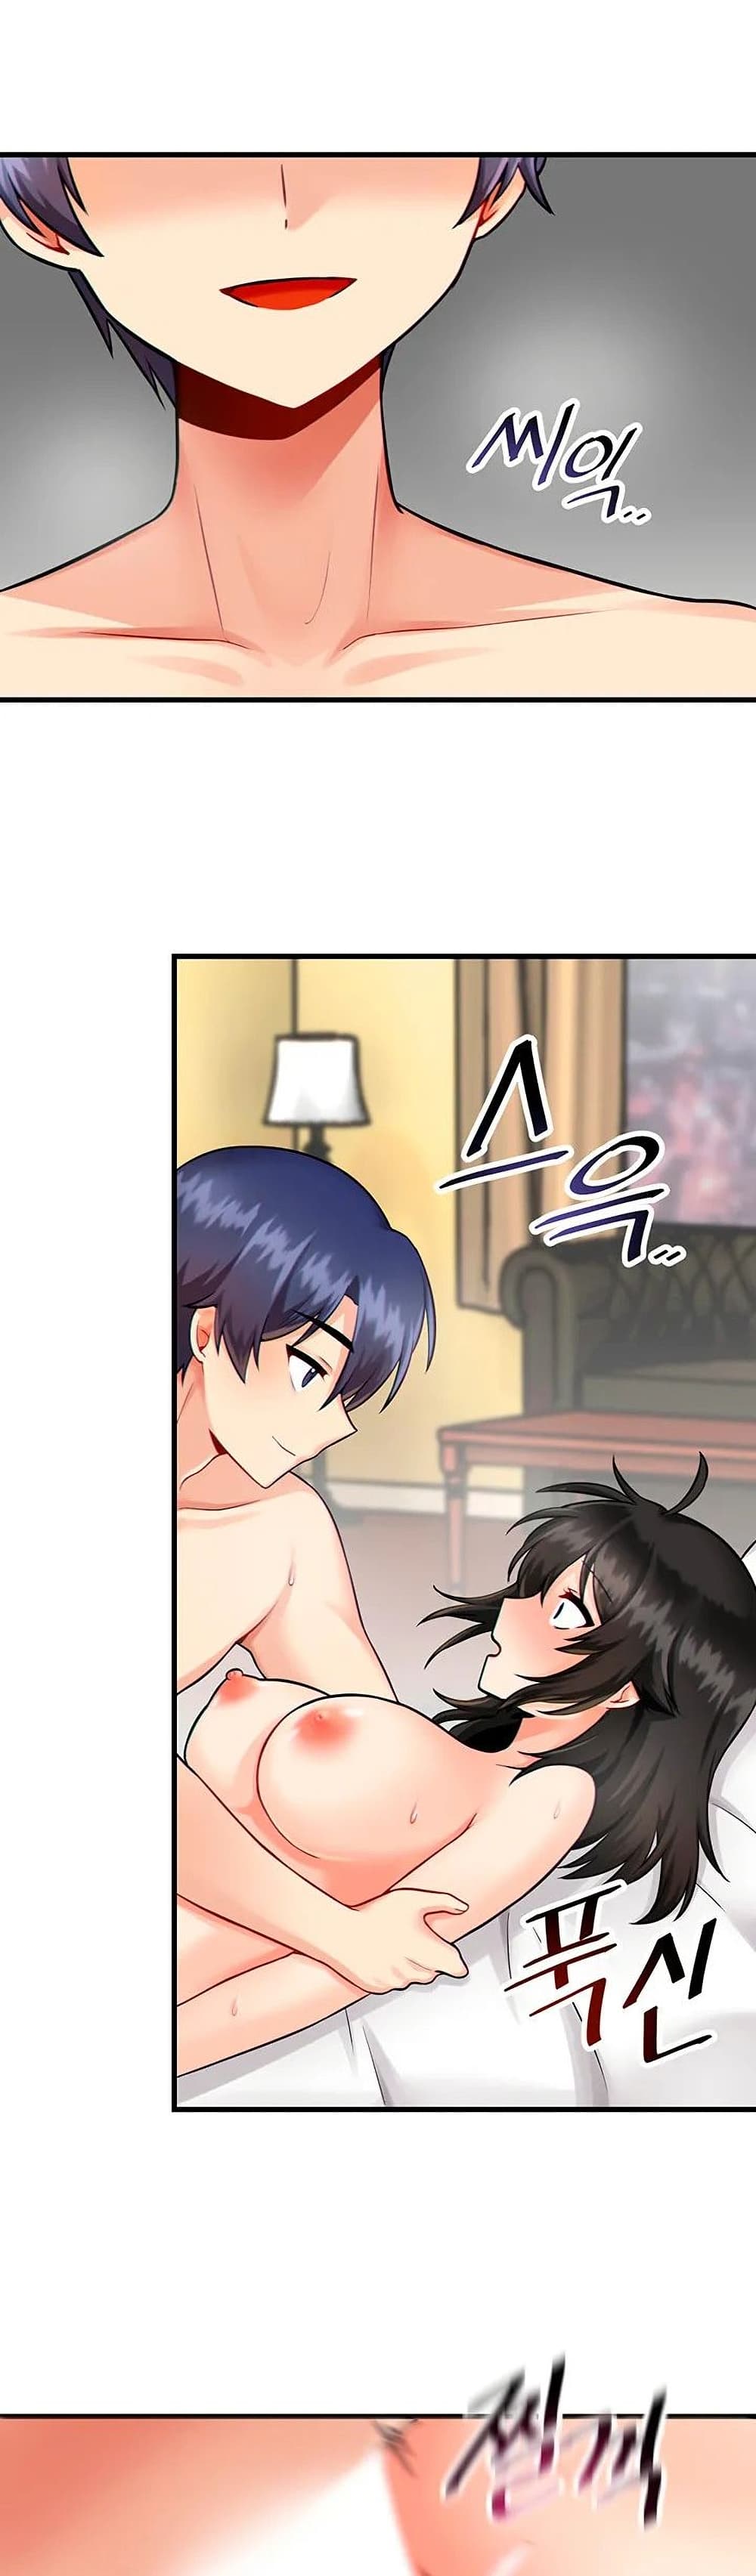 Trapped in the Academyâ€™s Eroge 11 (35)